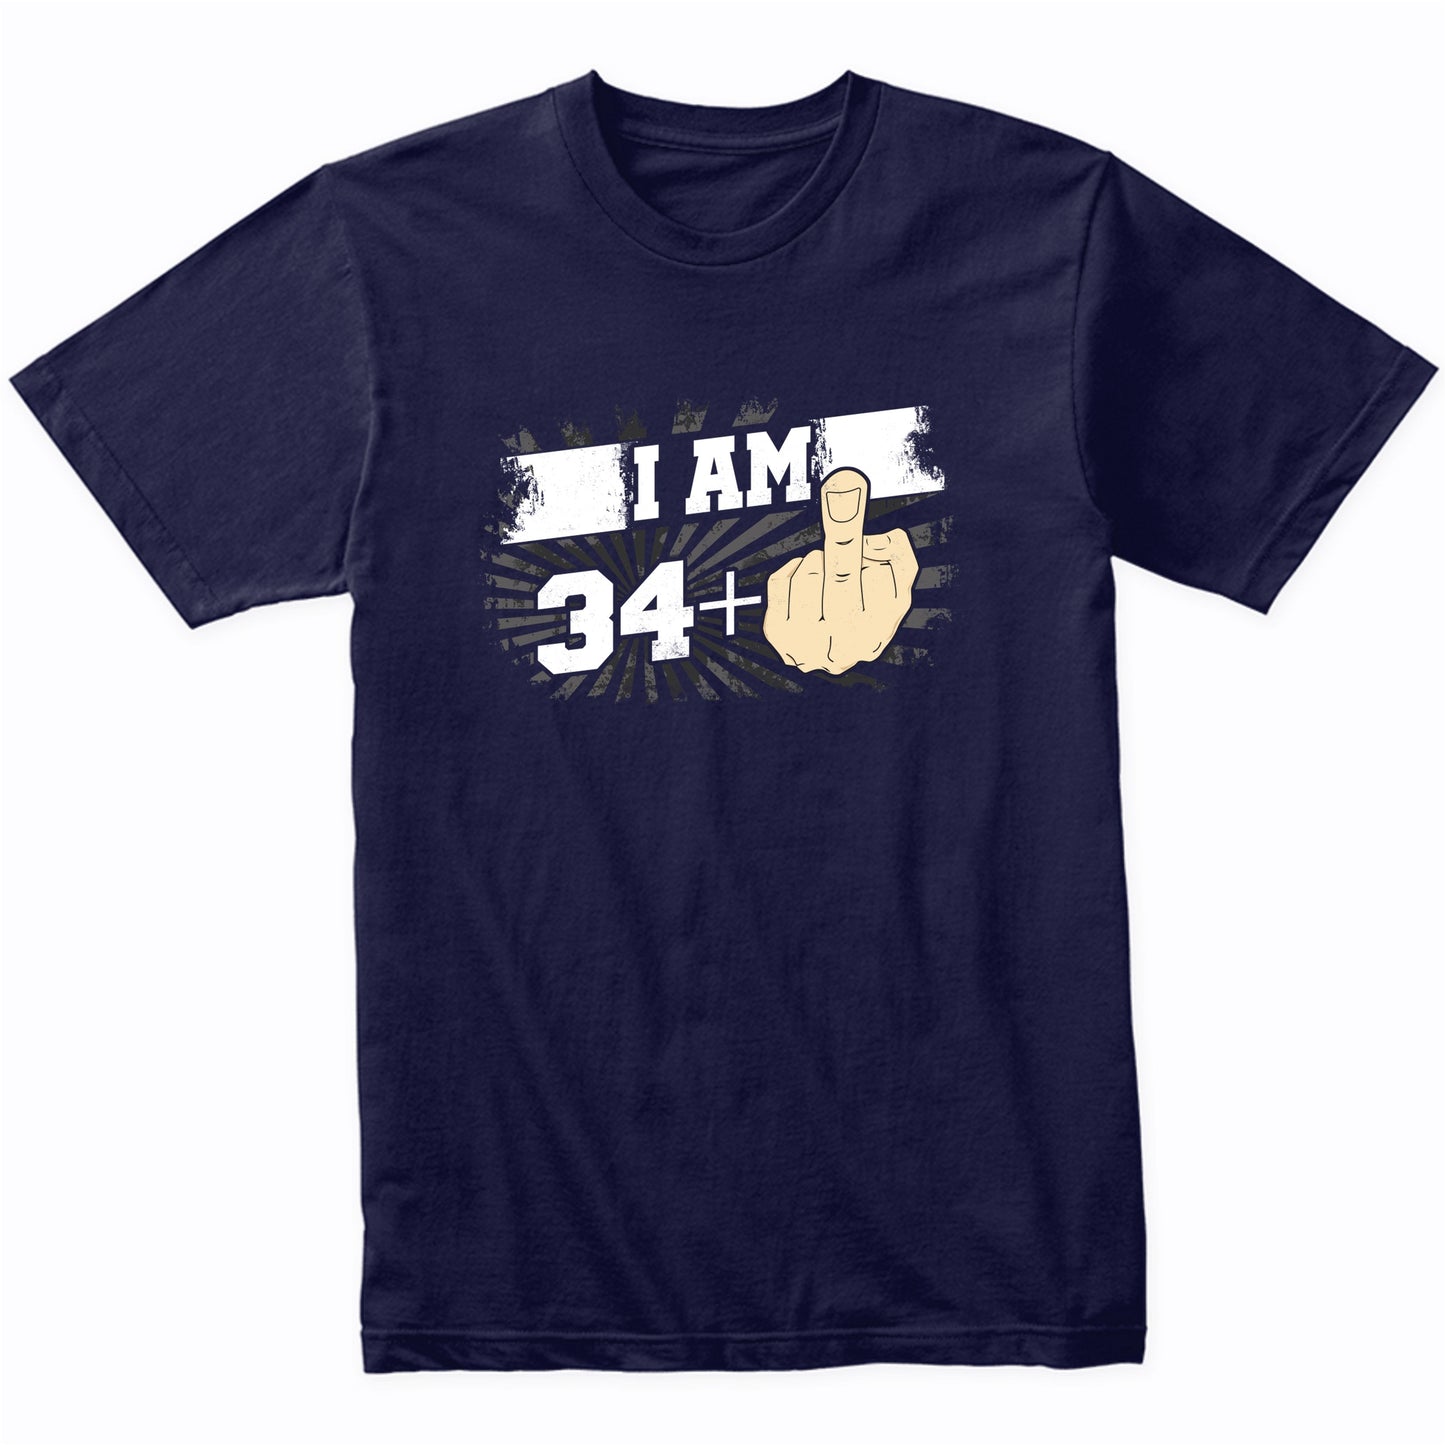 35th Birthday Shirt For Men - I Am 34 Plus Middle Finger 35 Years Old T-Shirt